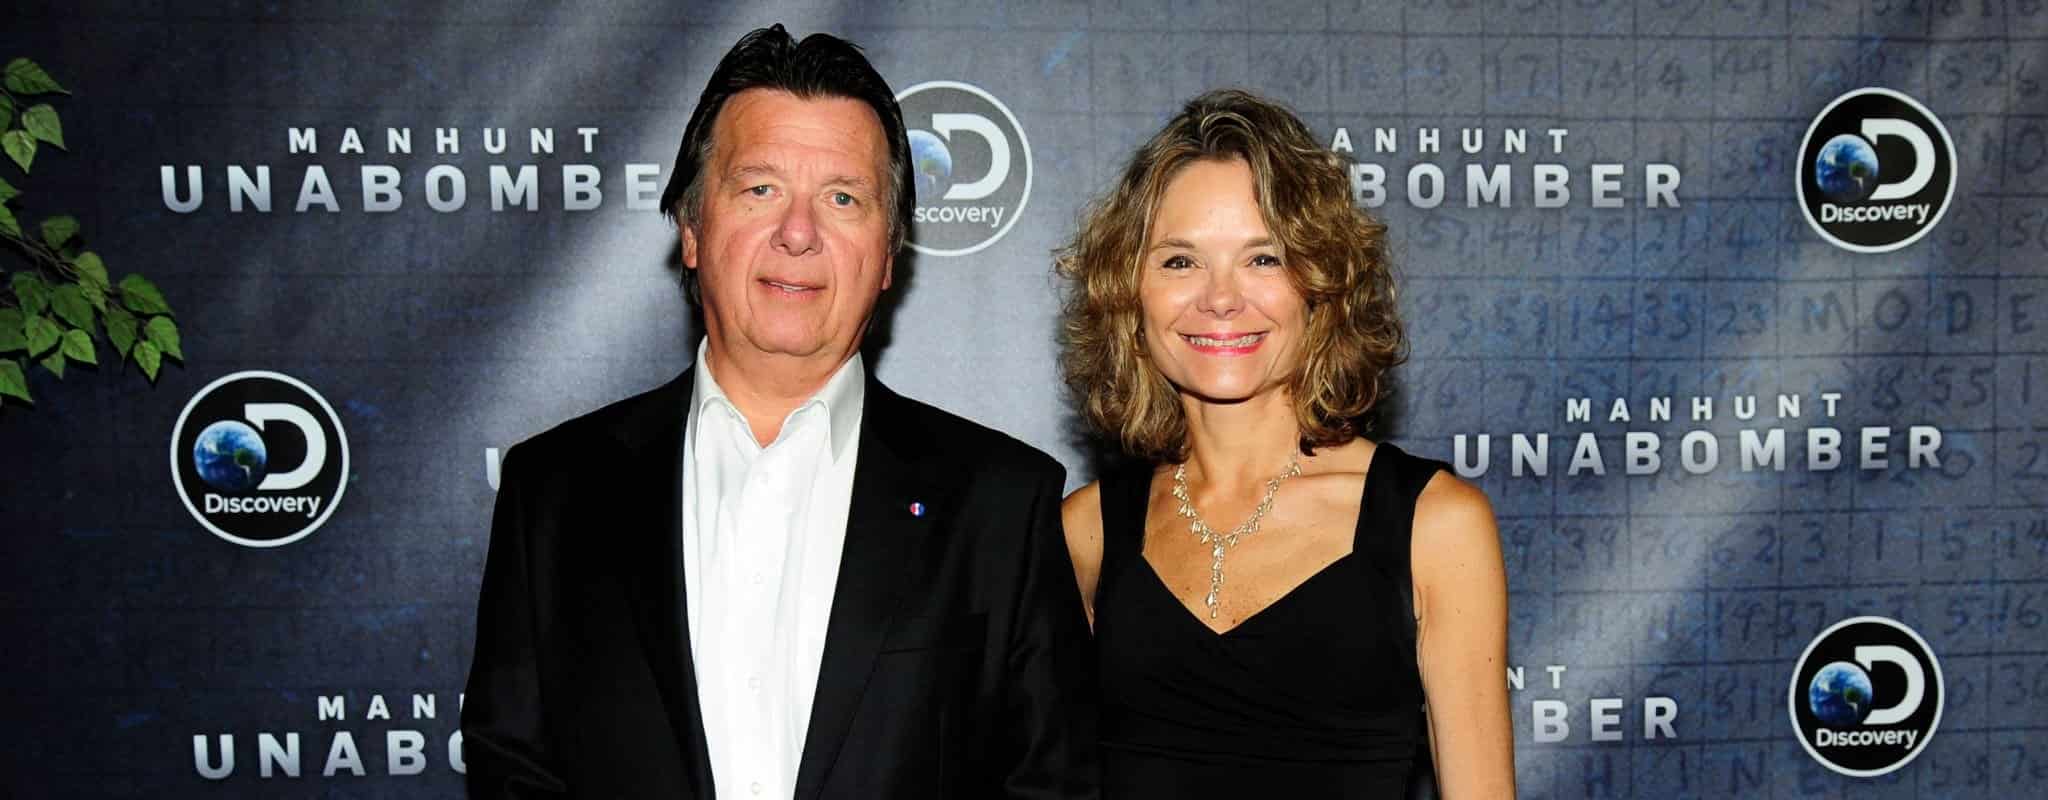 Image of James Fitzgerald with his wife, Natalie Schilling